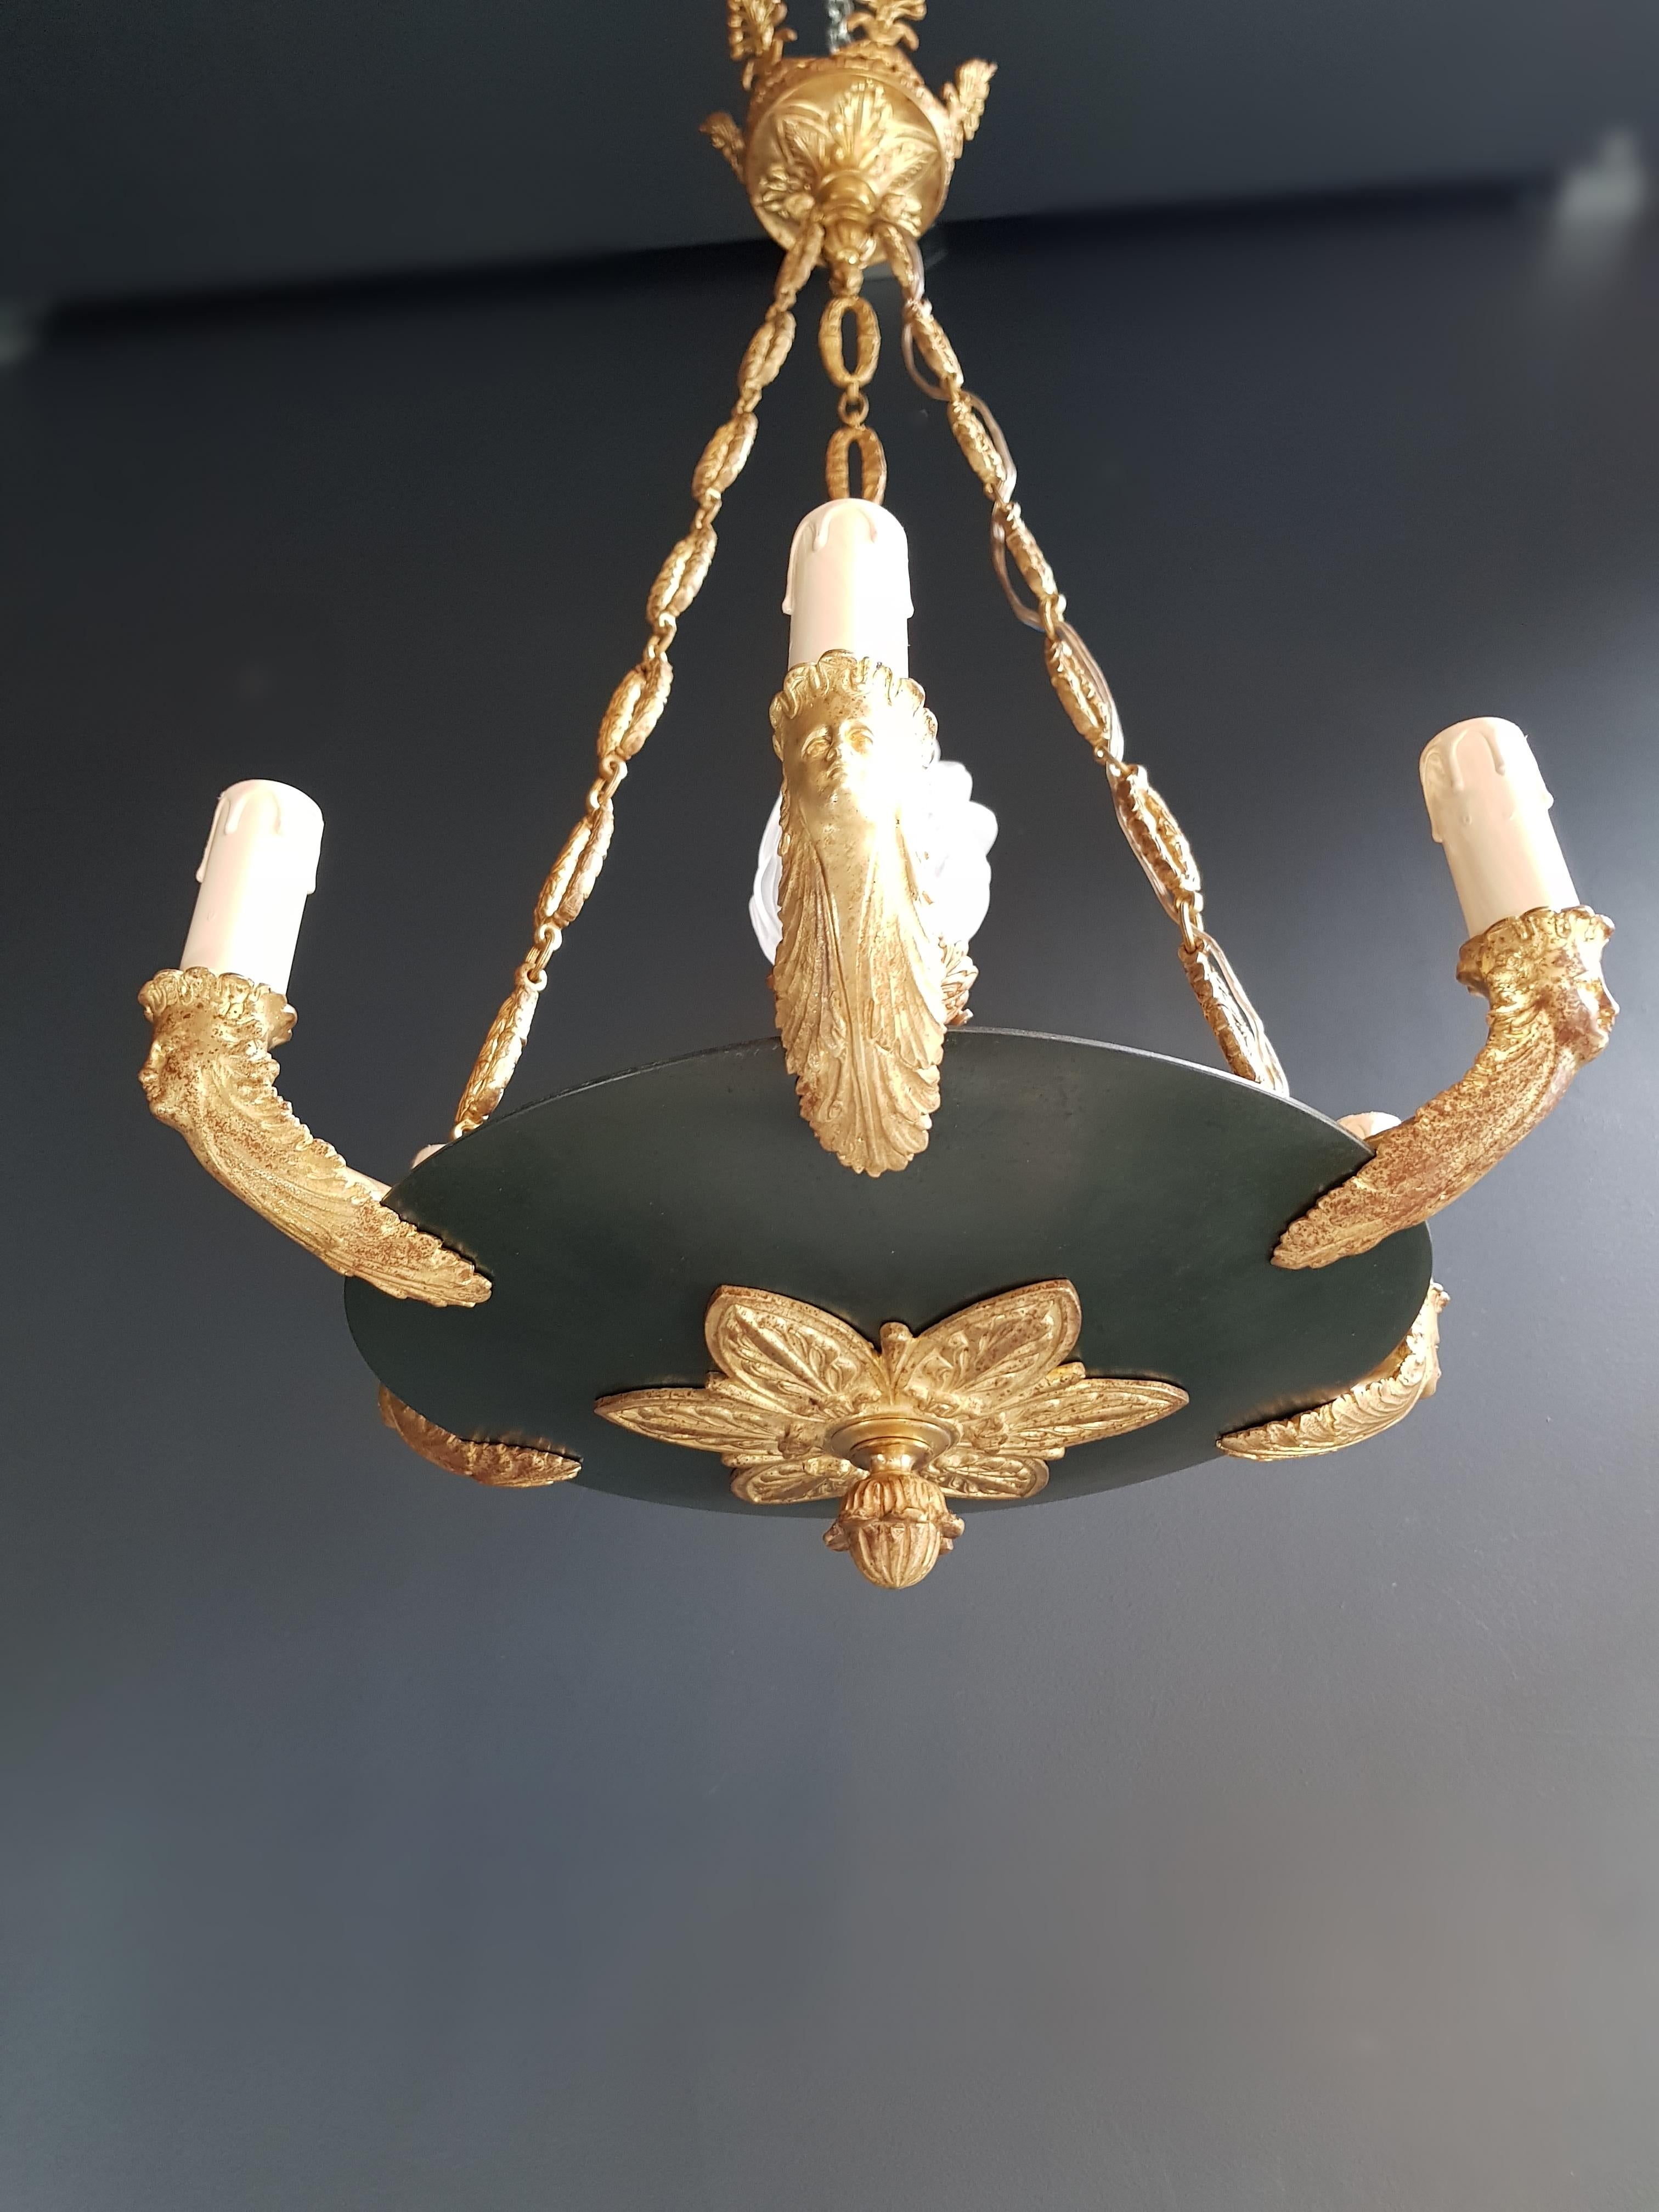 Cabling and sockets completely renewed.
Measures: Total height: 75 cm, height without chain: 75 cm, diameter 44 cm, weight (approximately) 8 kg.

Number of lights: 7-light bulb sockets: E14

Fine antique French Empire lustre neoclassical patina